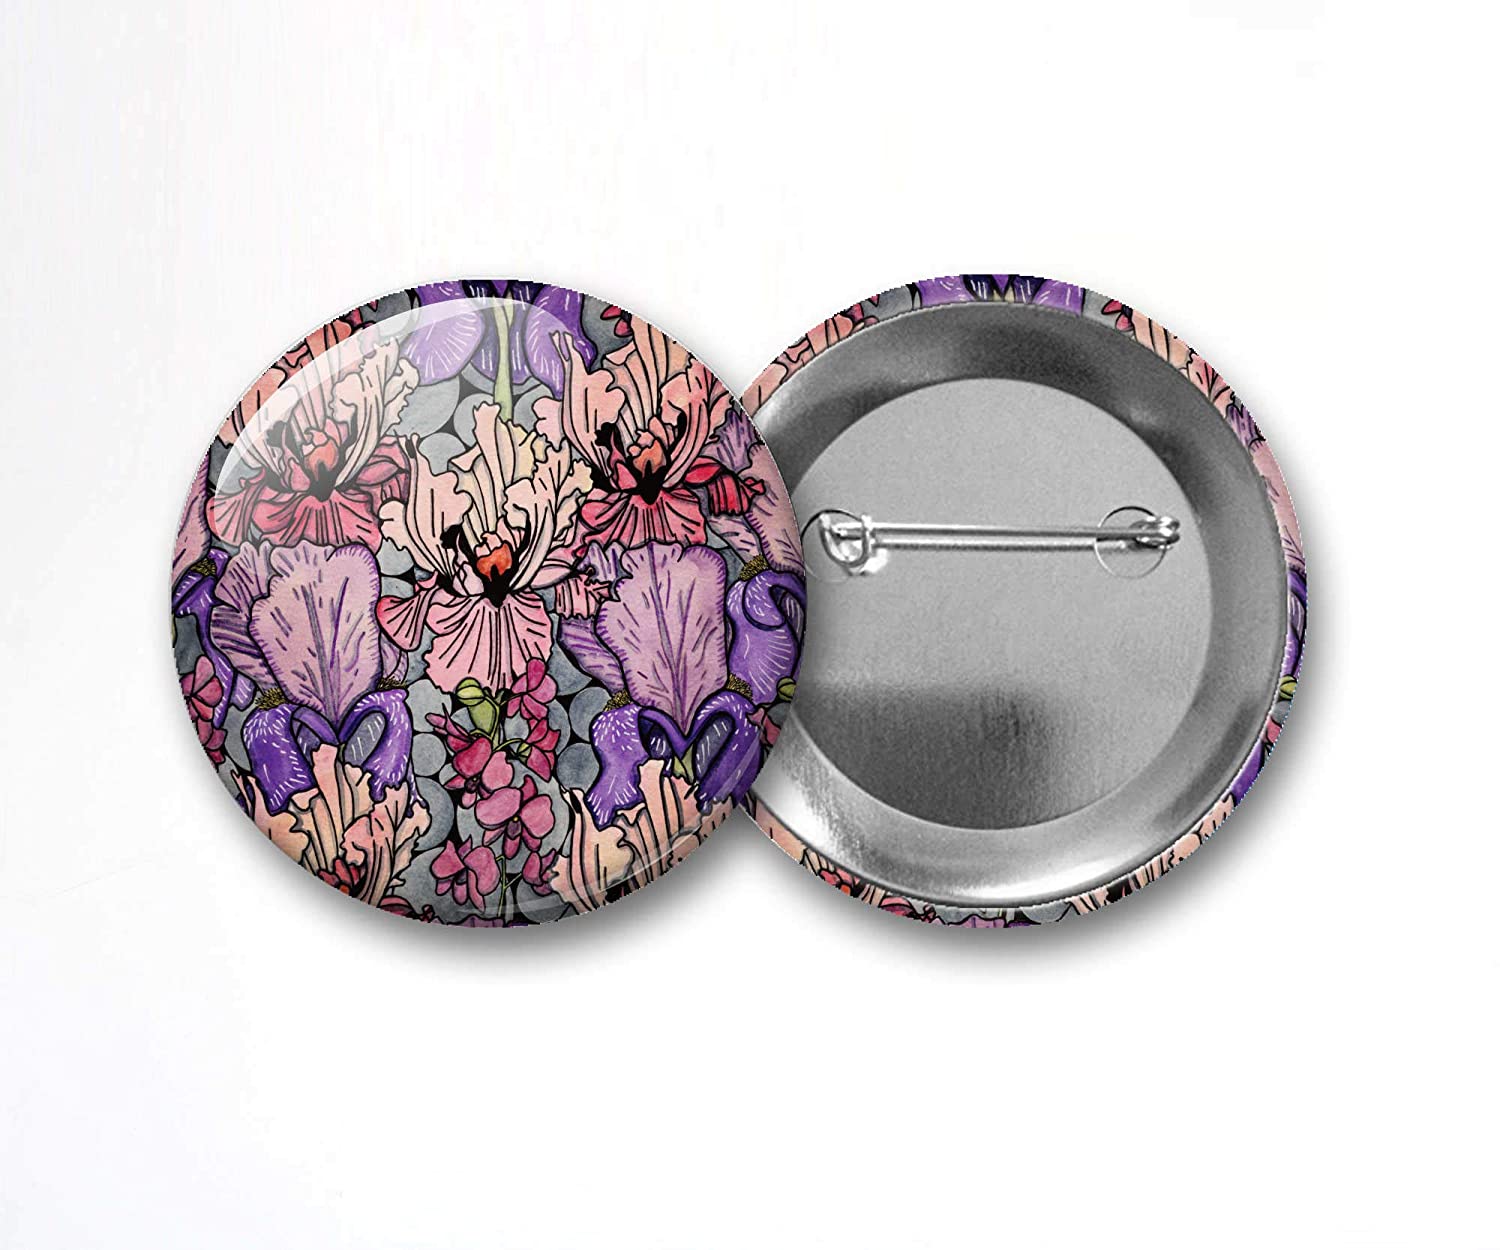 PinkPolish Design Buttons "Floral Repetition" Pin Back Button, 2.25 Inch